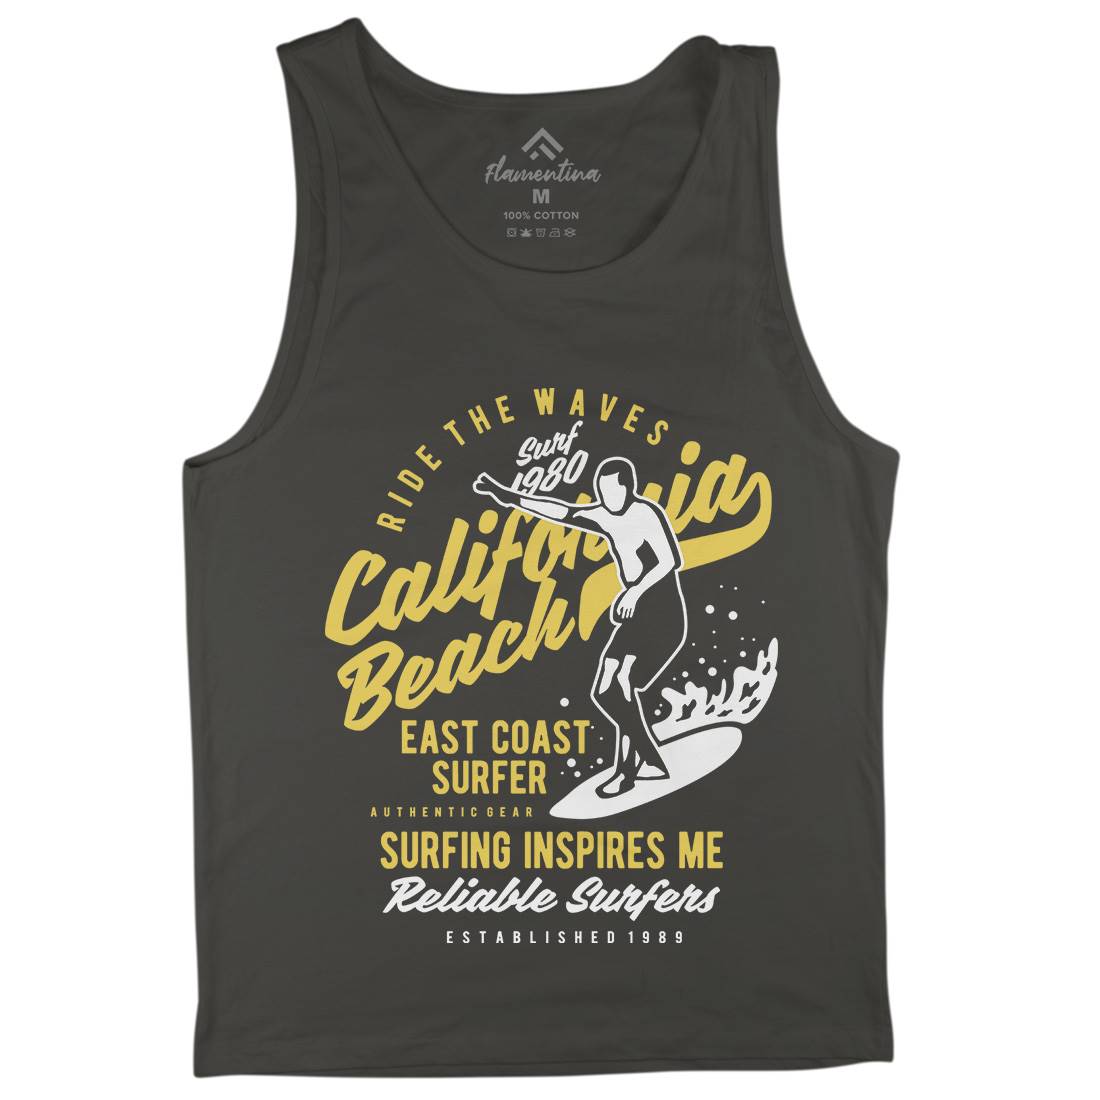 Ride The Waves In California Mens Tank Top Vest Surf B439